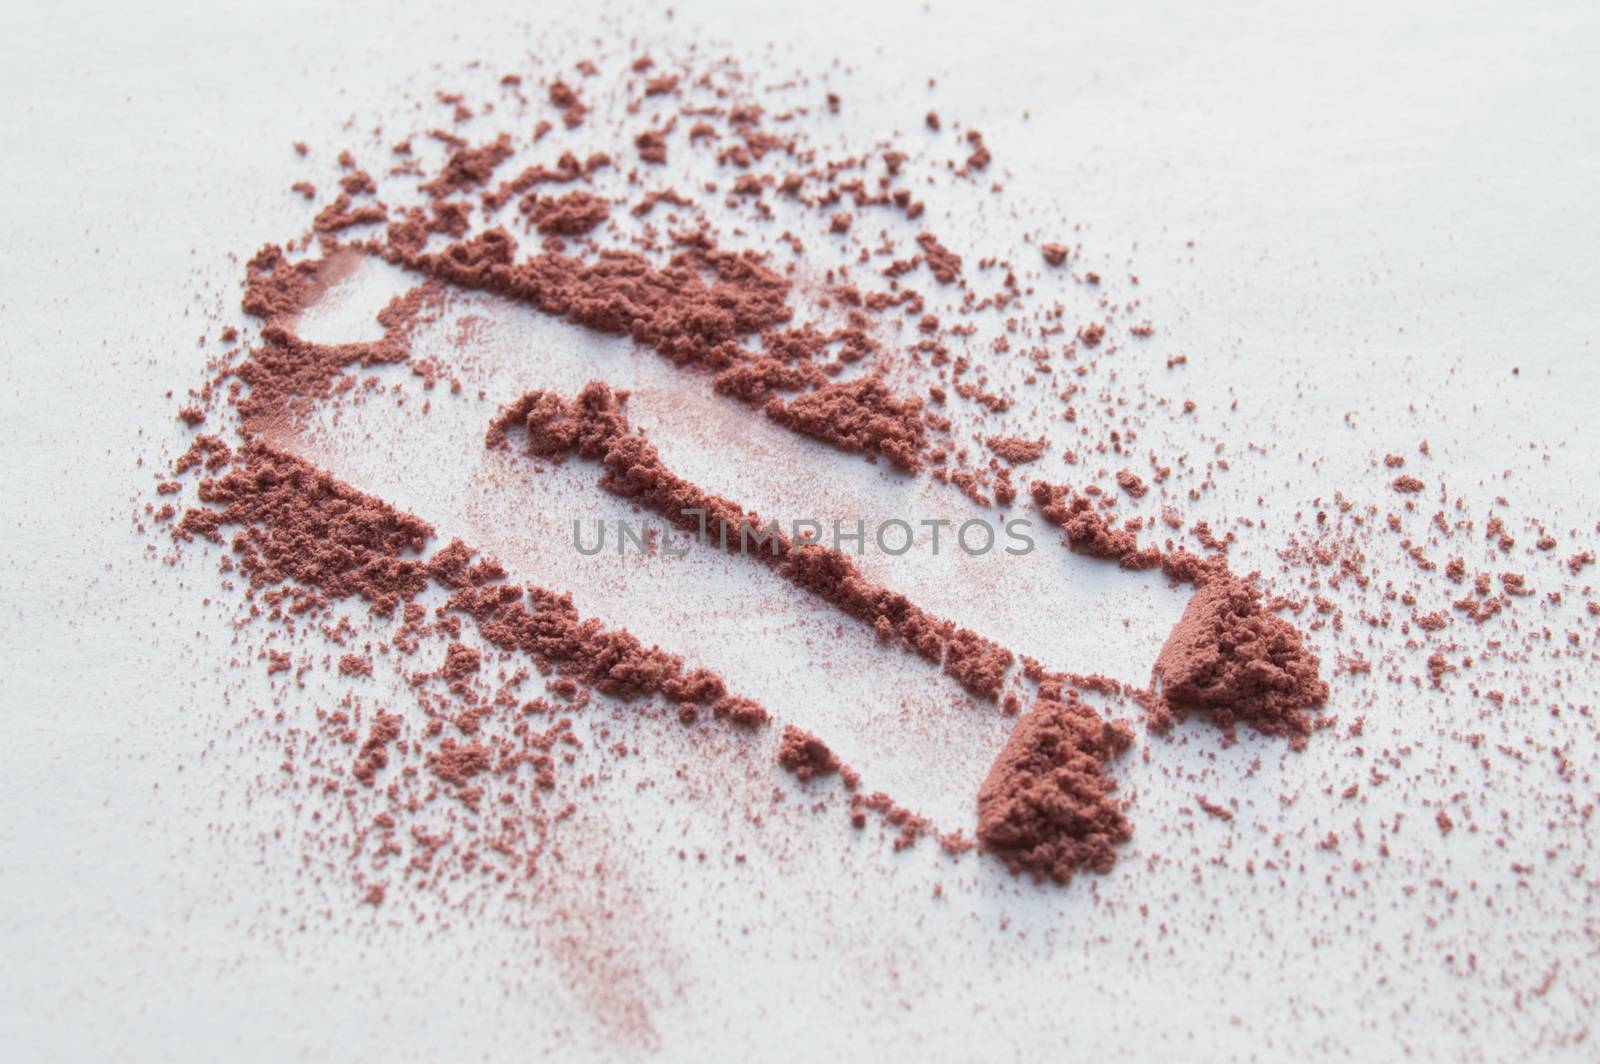 Scattered beige powder, Crumbles natural makeup powder on white background by claire_lucia